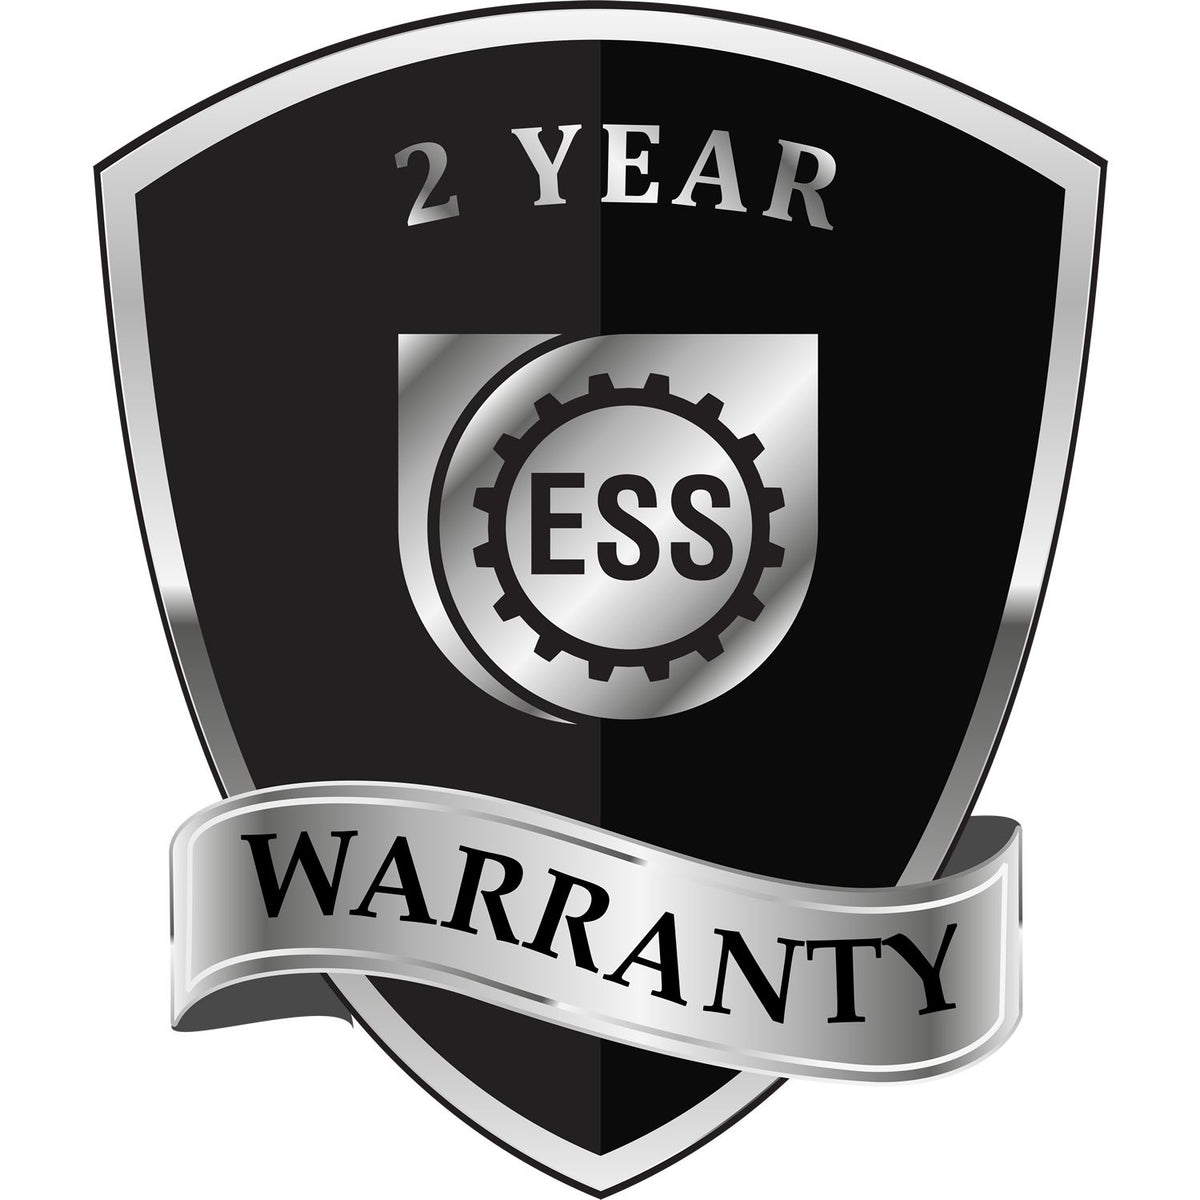 A badge or emblem showing a warranty icon for the Heavy Duty Cast Iron Arkansas Engineer Seal Embosser